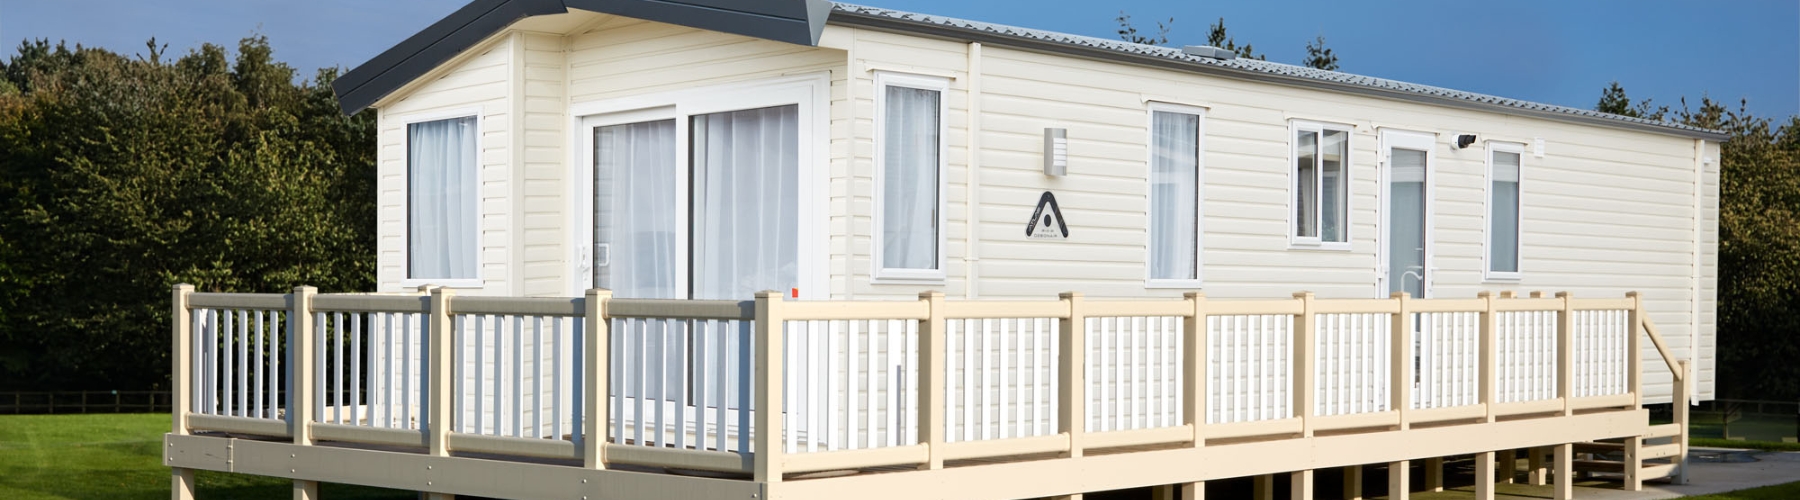 Holiday Homes For Sale In Northumberland